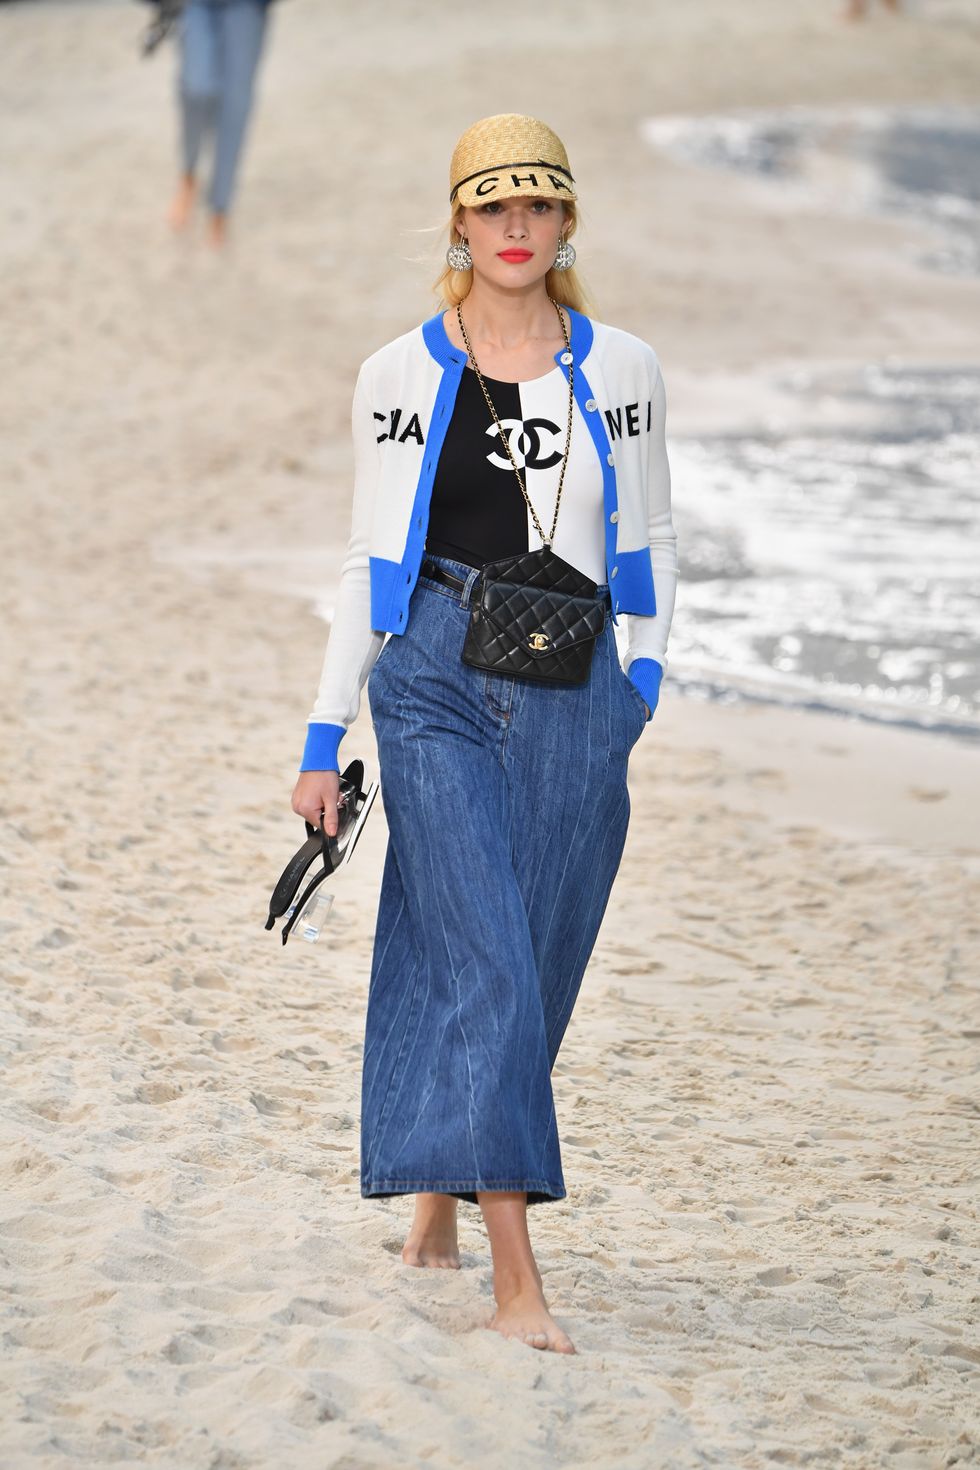 Why Chanel's Beach Show Proves It Remains The Same – It's The